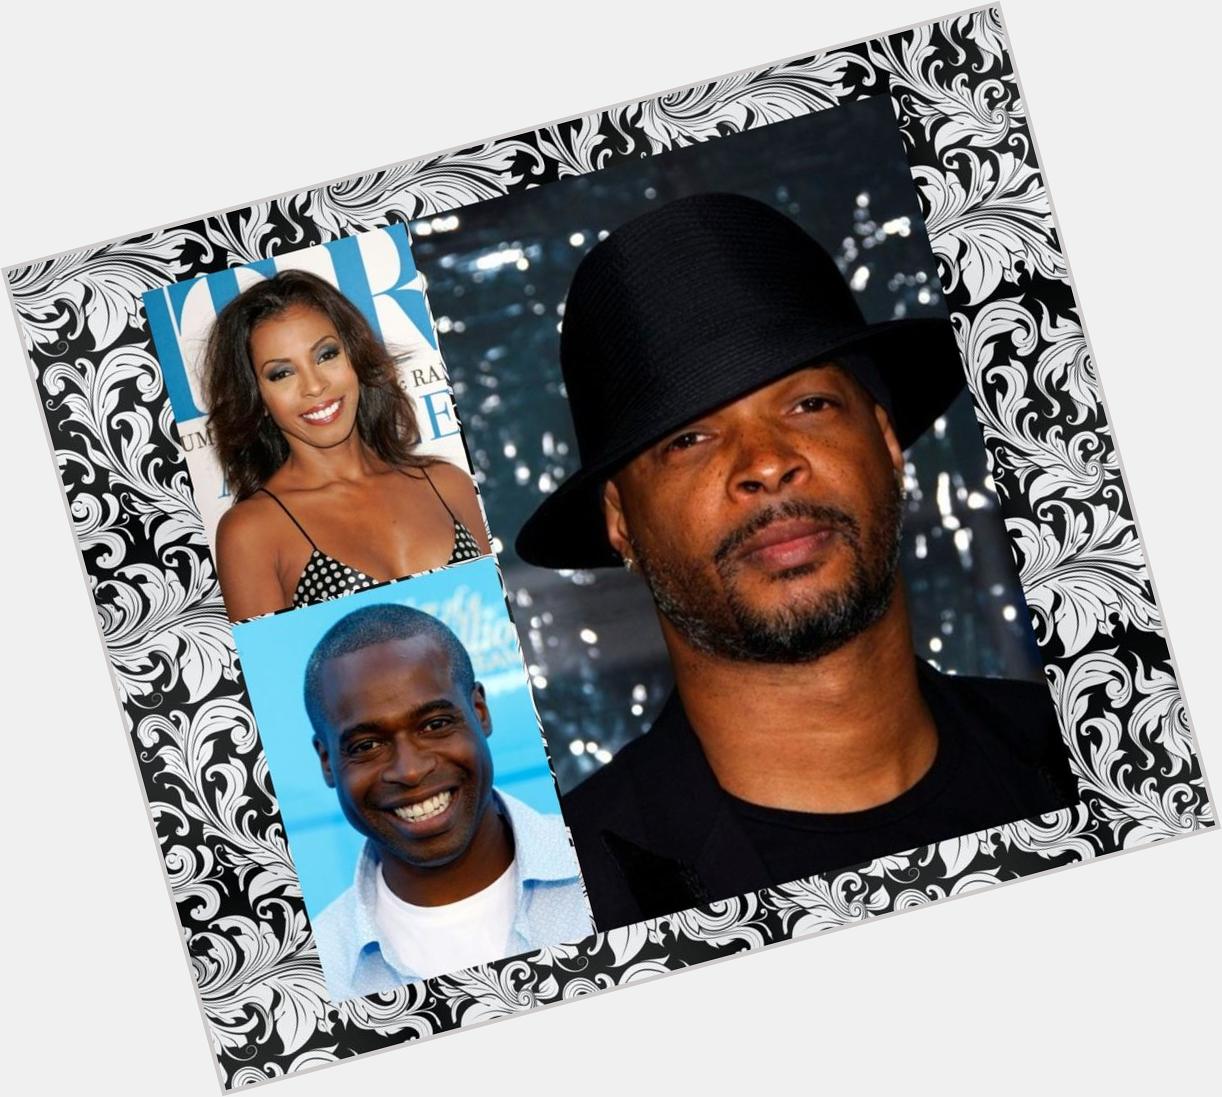   wishes Damon Wayans , Khandi Alexander , and Phill Lewis , a very happy birthday! 